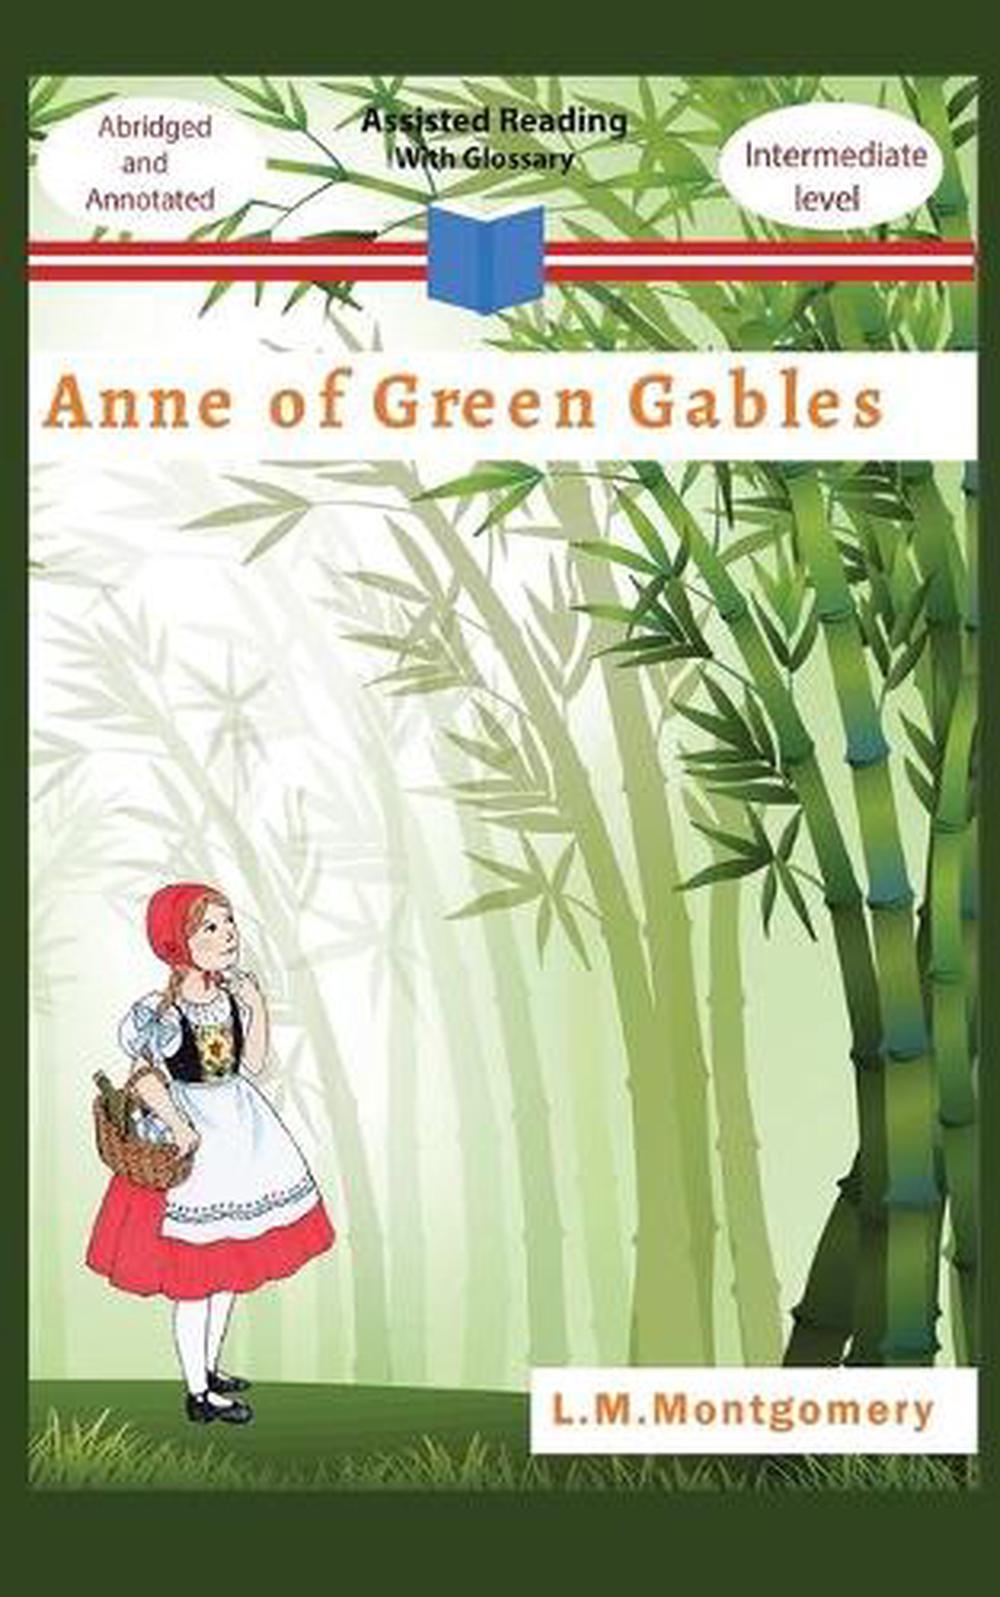 lucy montgomery anne of green gables